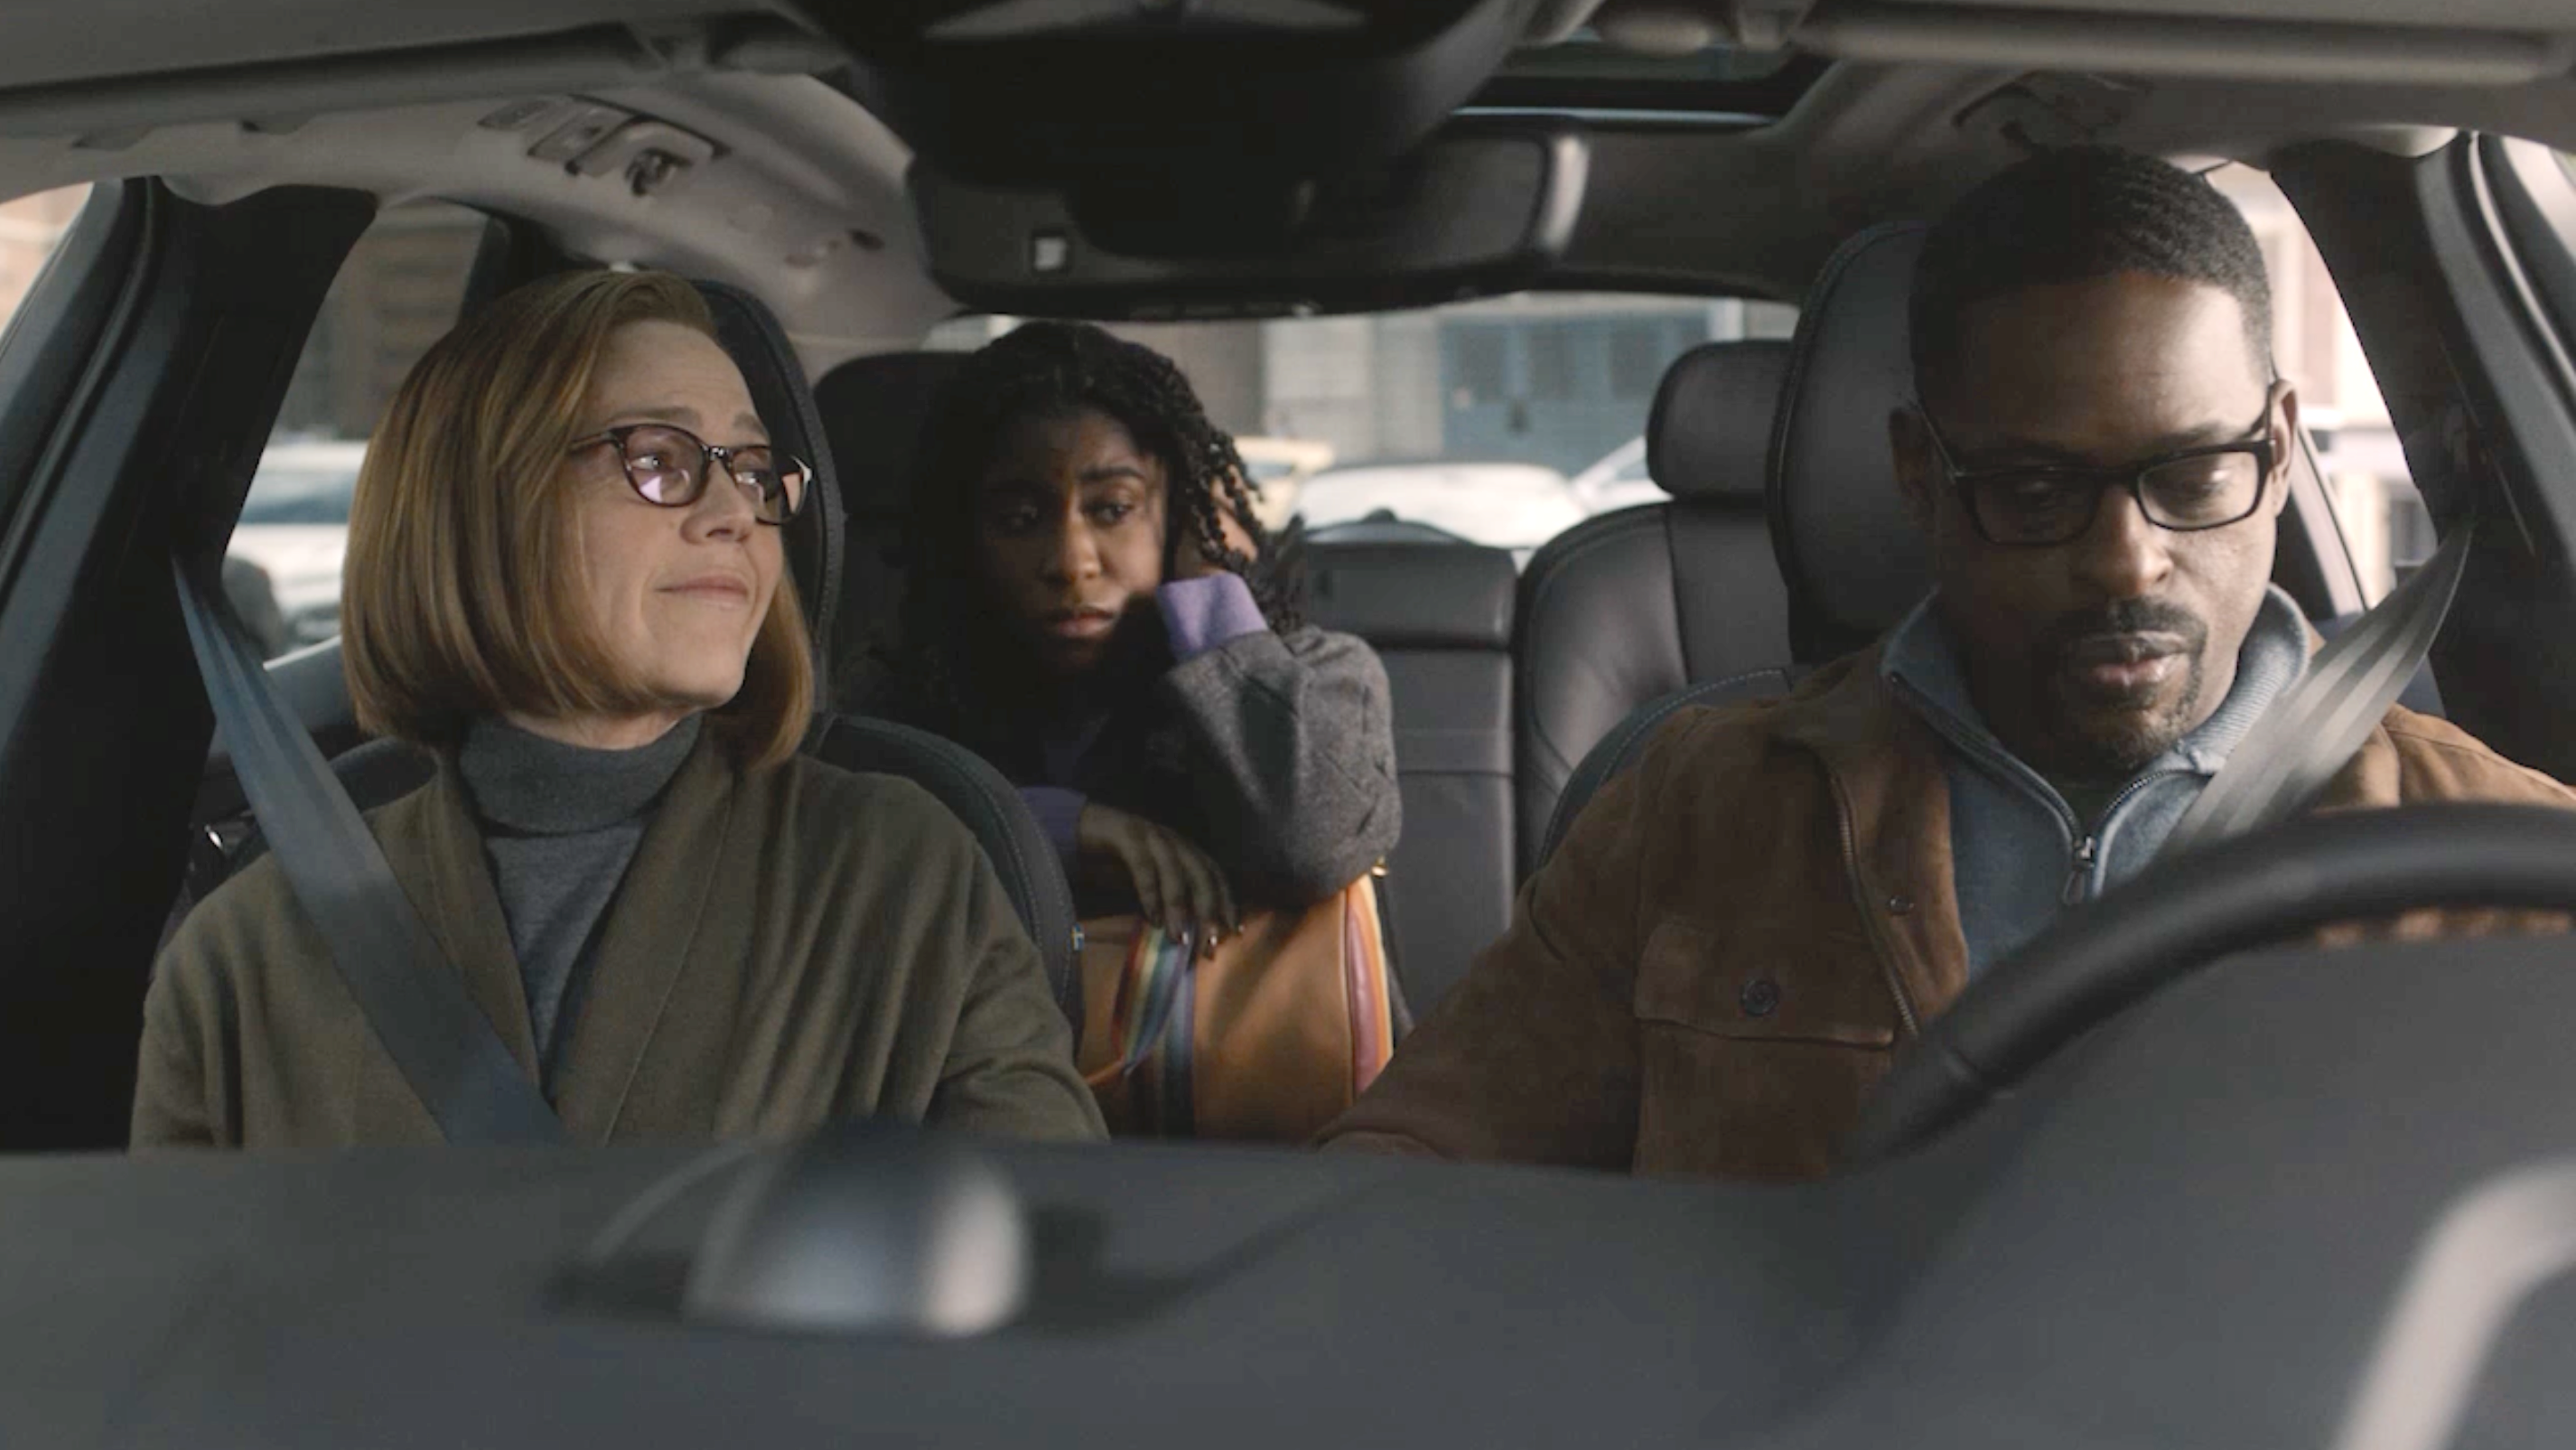 This Is Us sends Randall and Rebecca on a nostalgic road trip